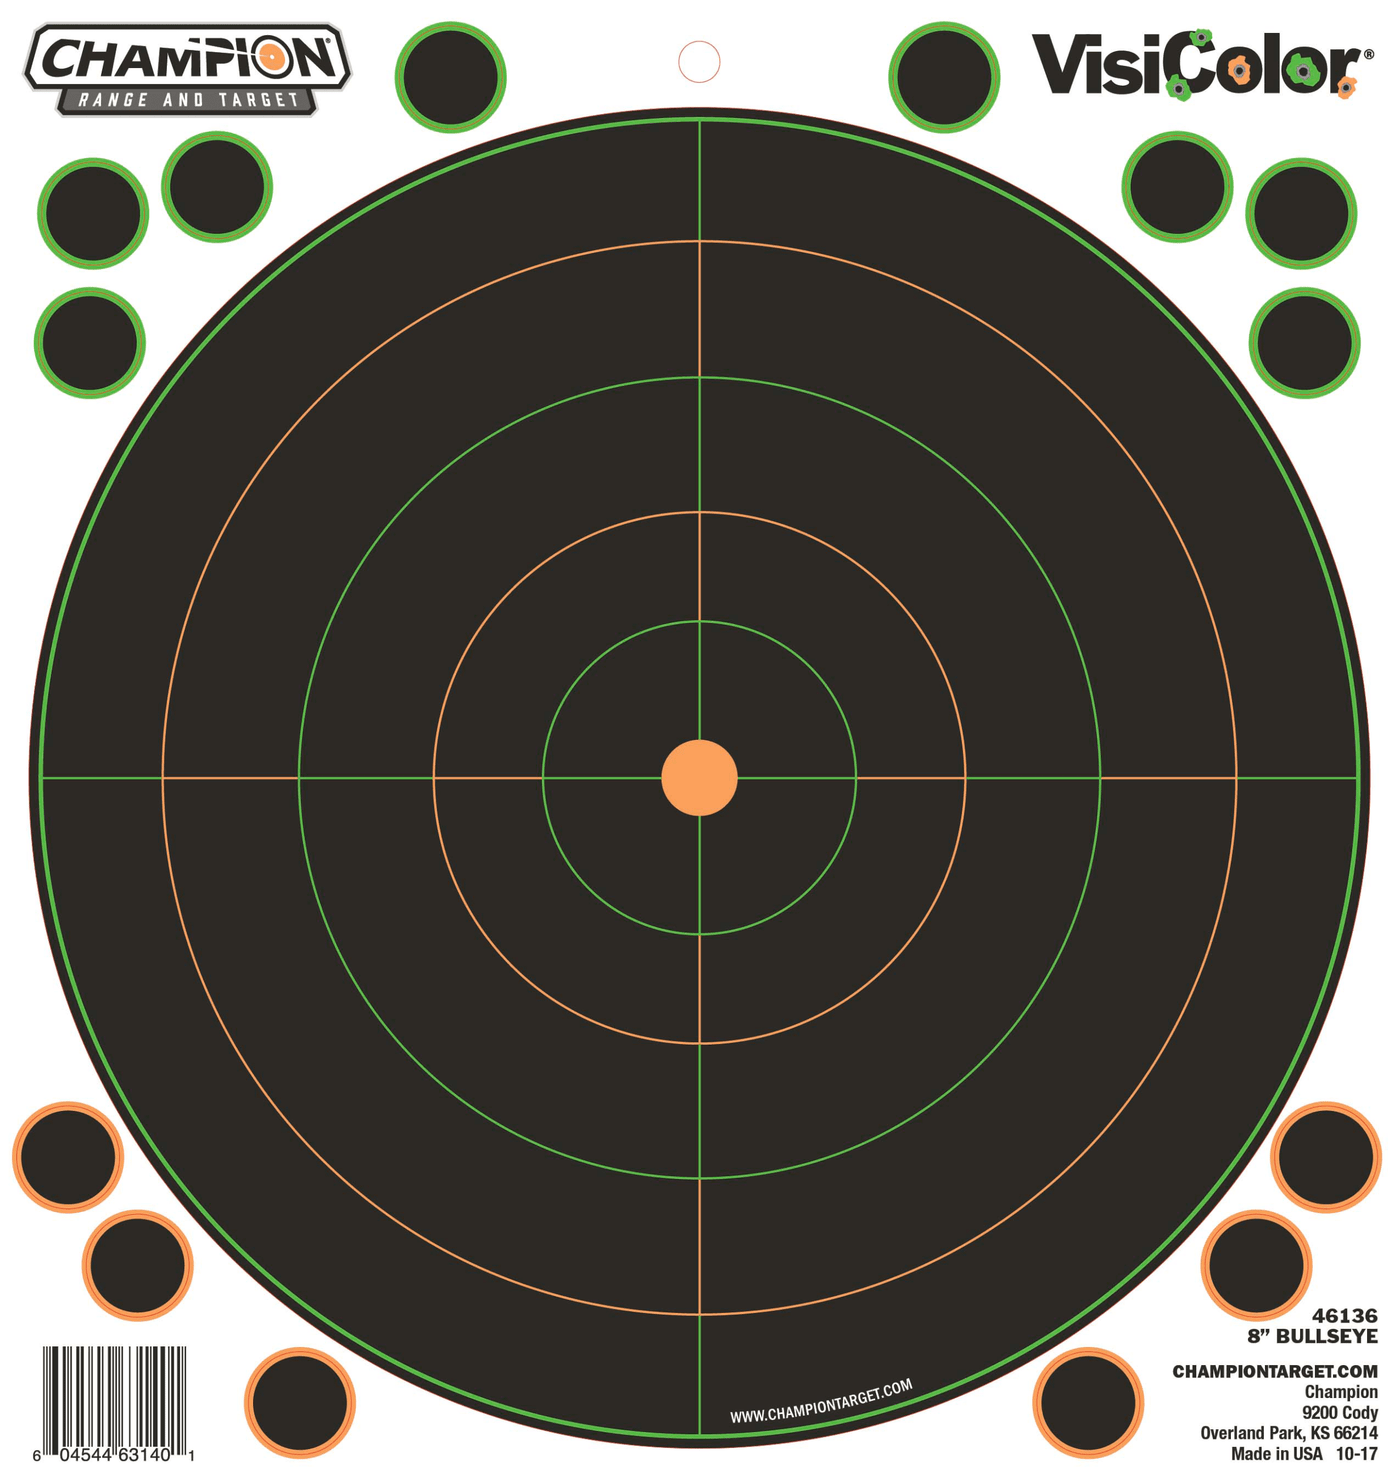 Champion Targets Champion Targets Visicolor, Champ 46136 8in Bulls Eye 5pk W/40 Pasters Shooting